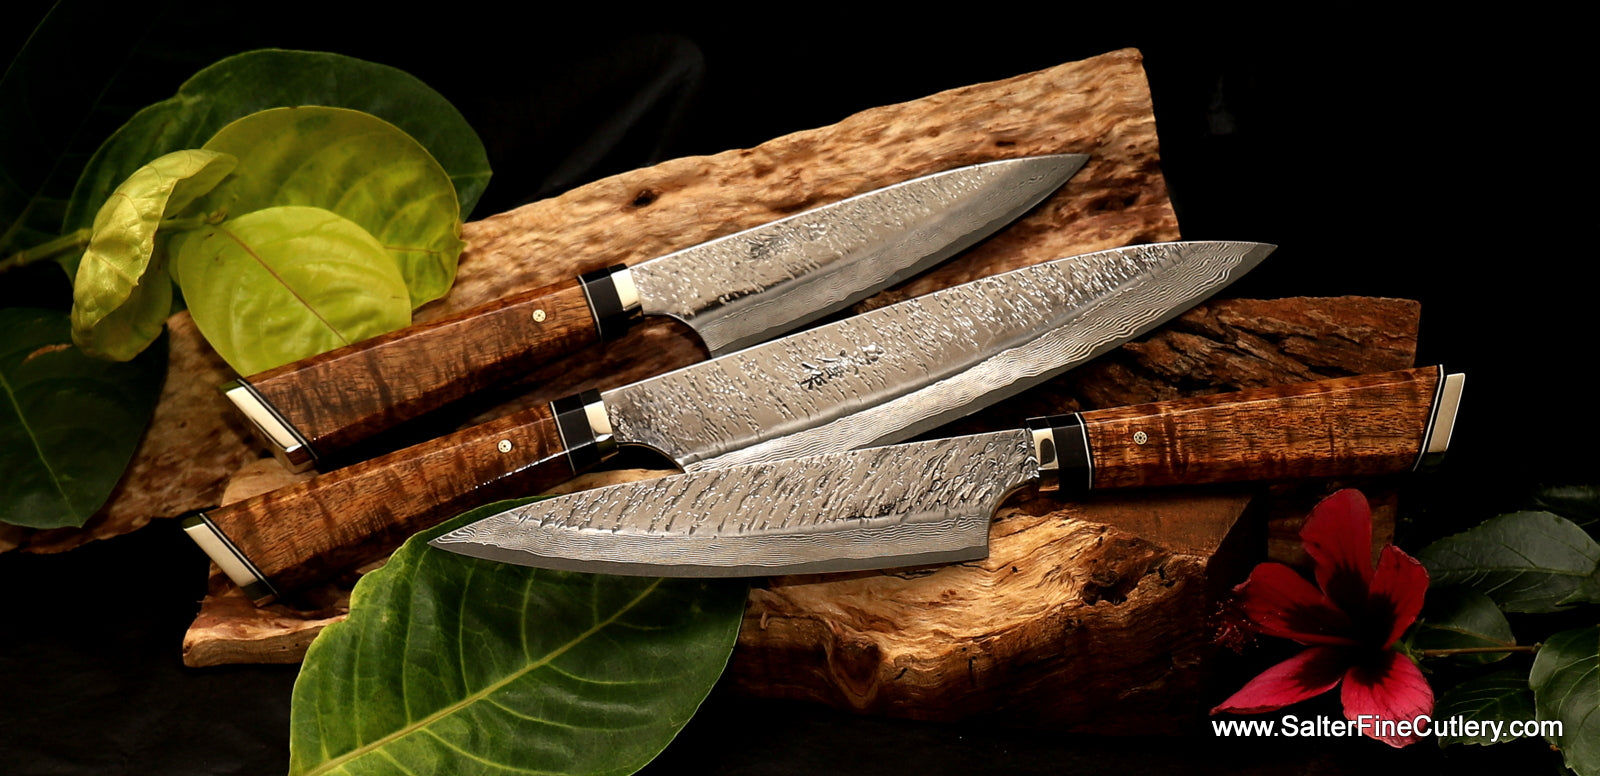 Salter Fine Cutlery exclusive Raptor design series of handforged kitchen knives for gourmet cooking